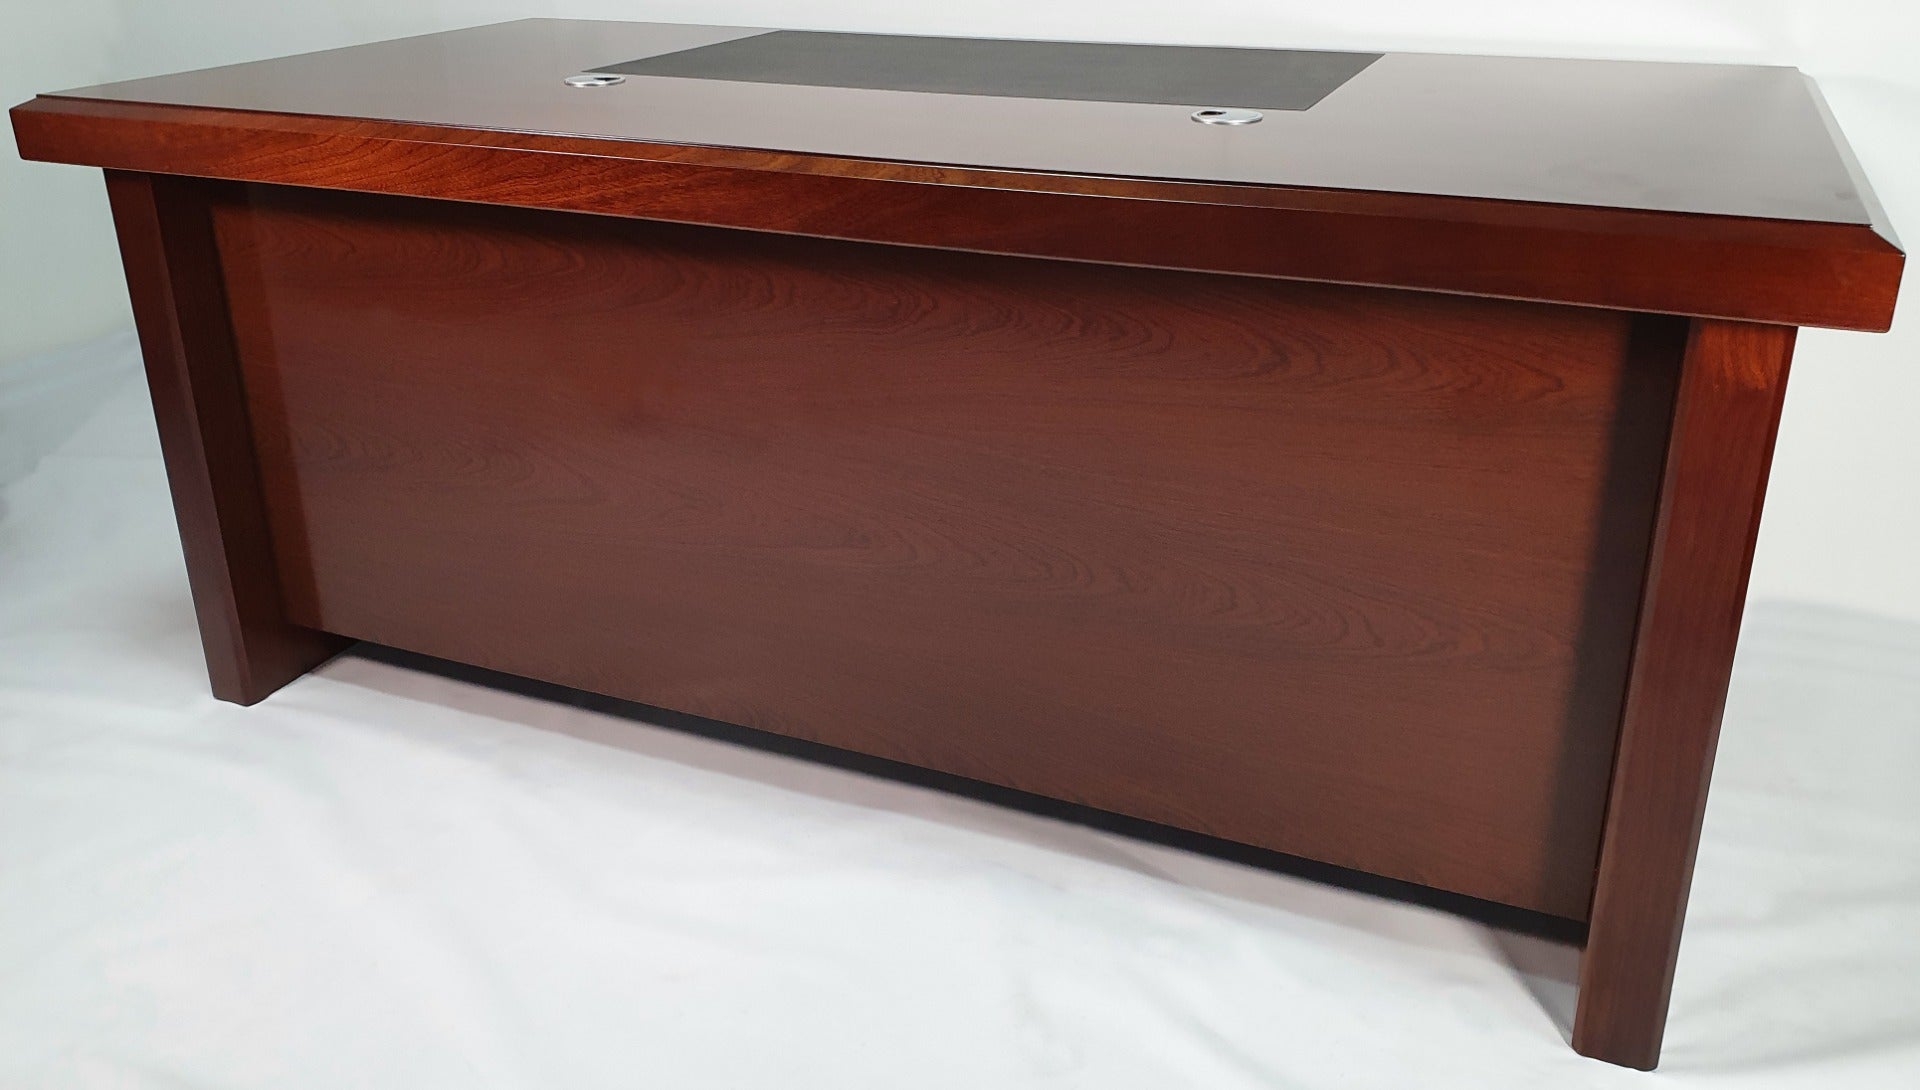 Walnut Real Wood Veneer Executive Desk with Pedestal and Return - BSE181 North Yorkshire